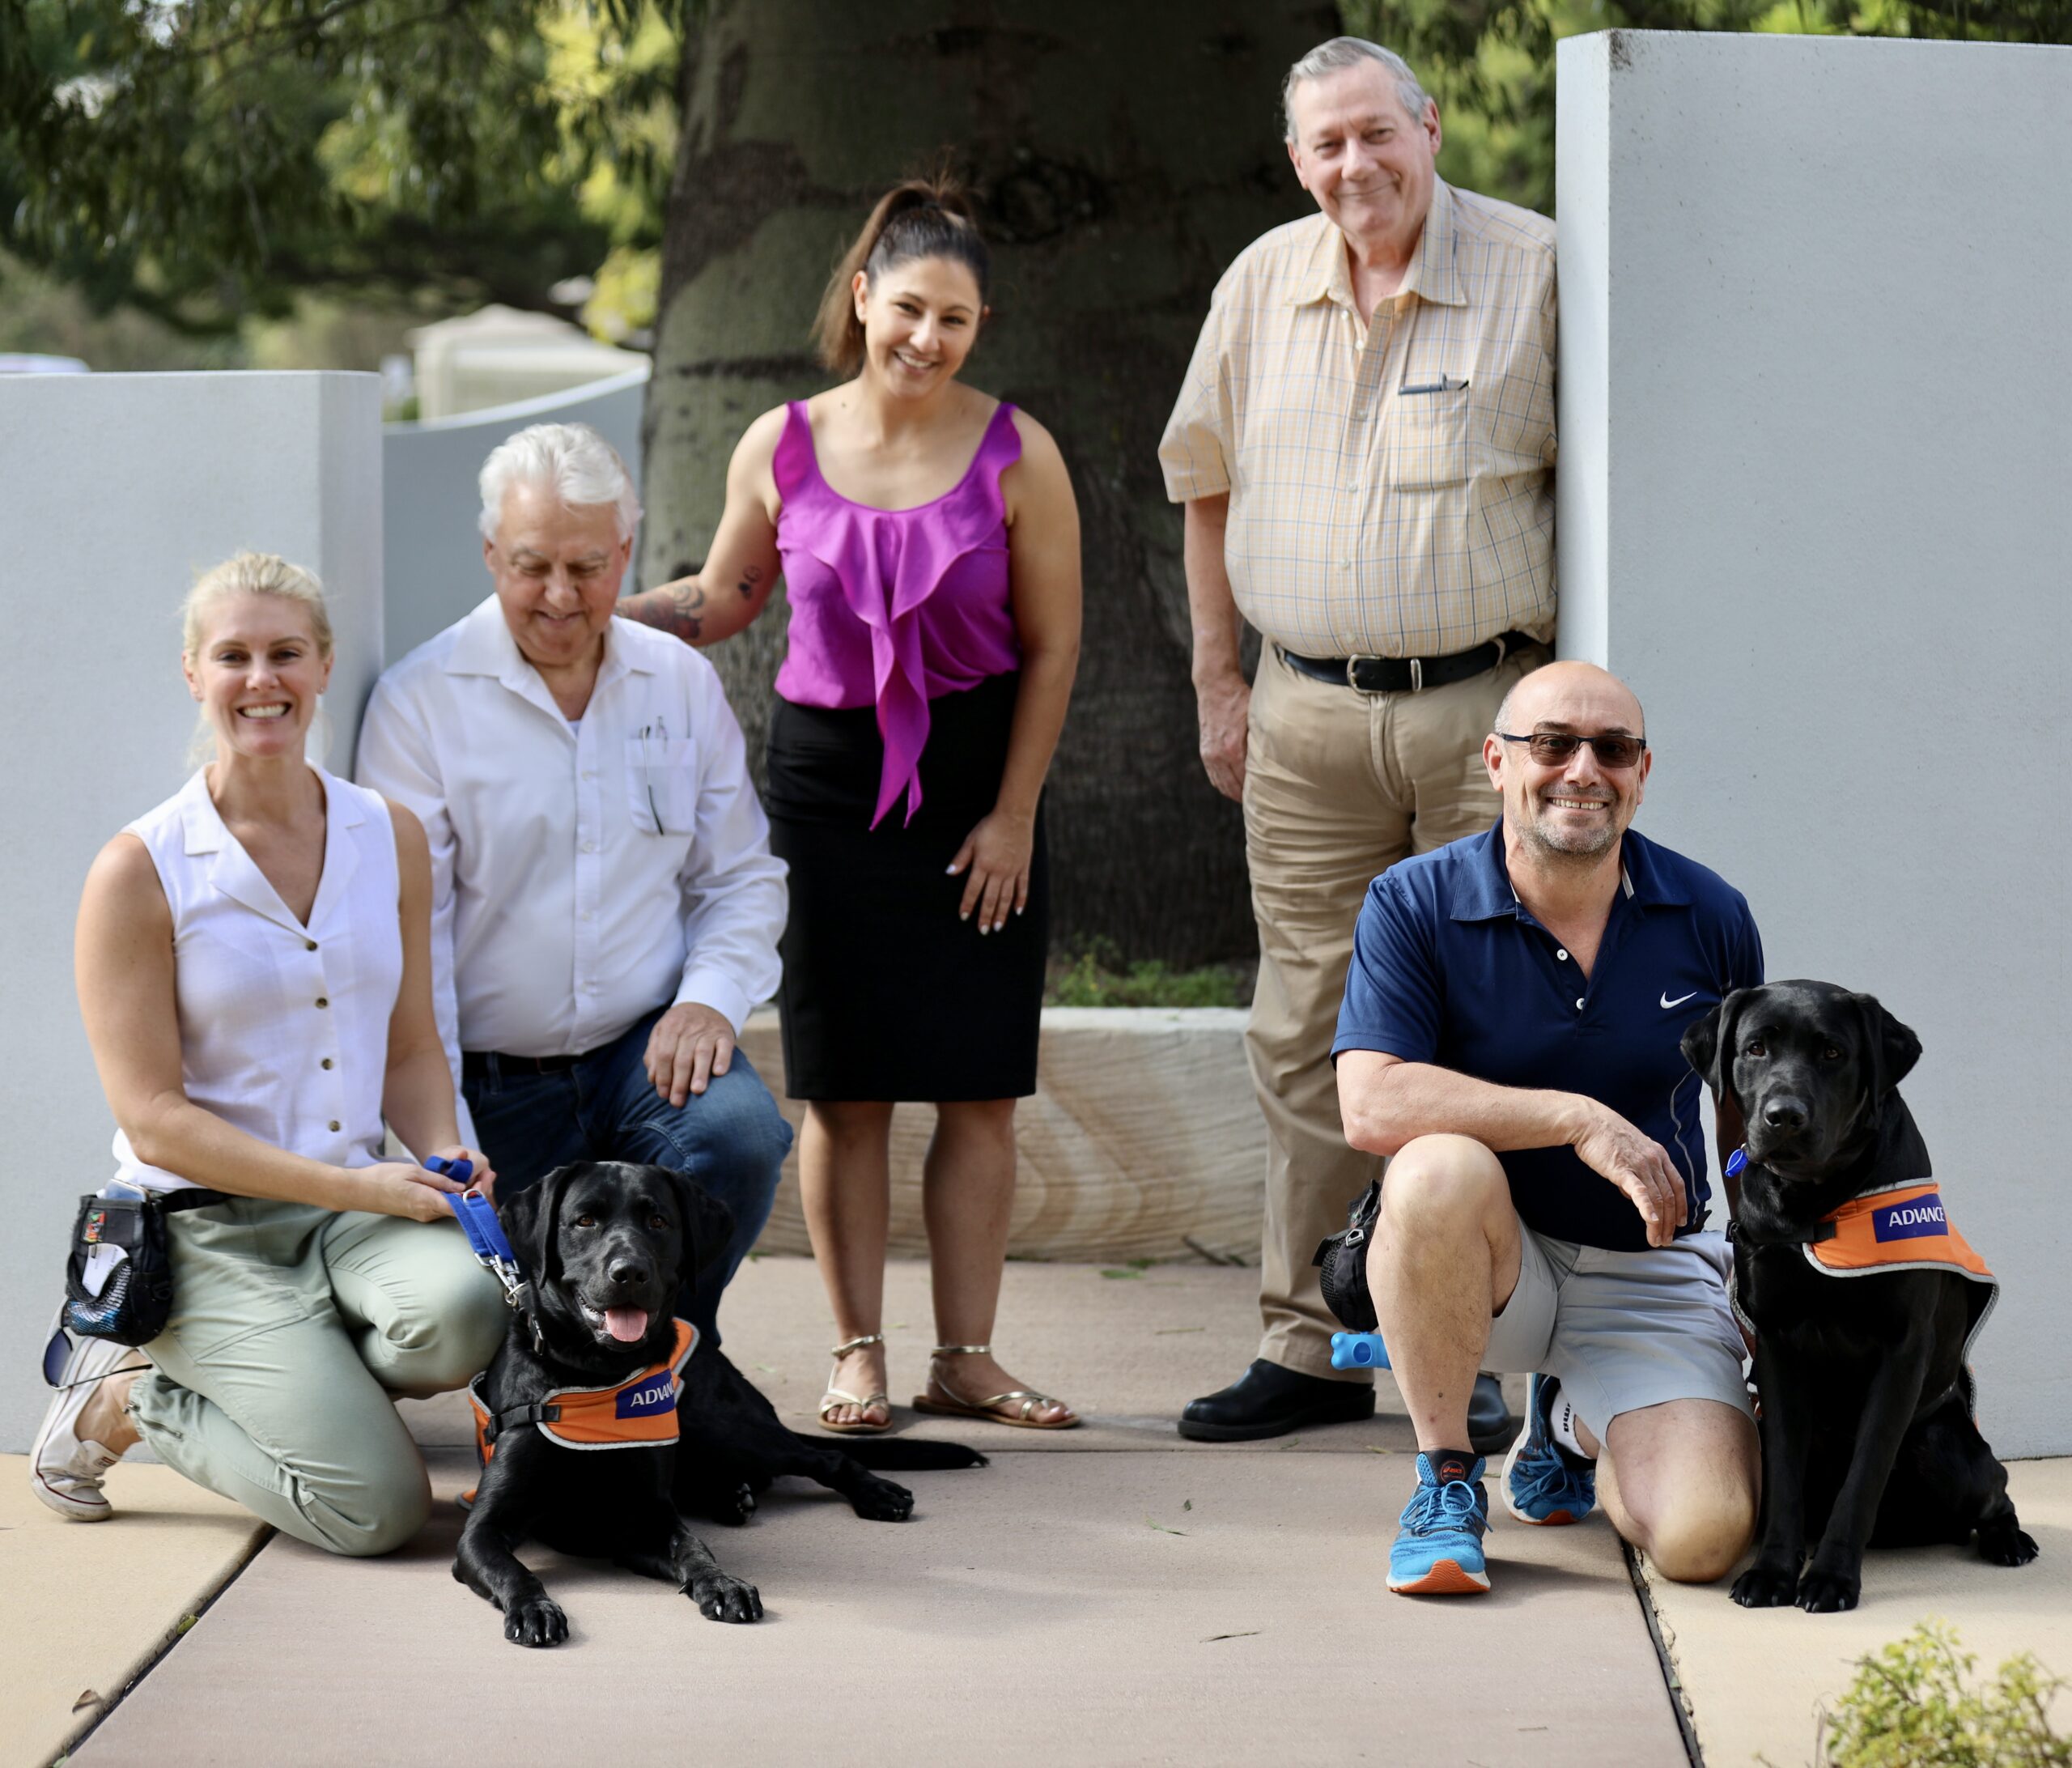 Guide Dogs-in training, Barron and Barnett are seen alongside their Puppy Raisers as well as a staff member from Guide Dogs and two representatives from Barron Barnett Lodge